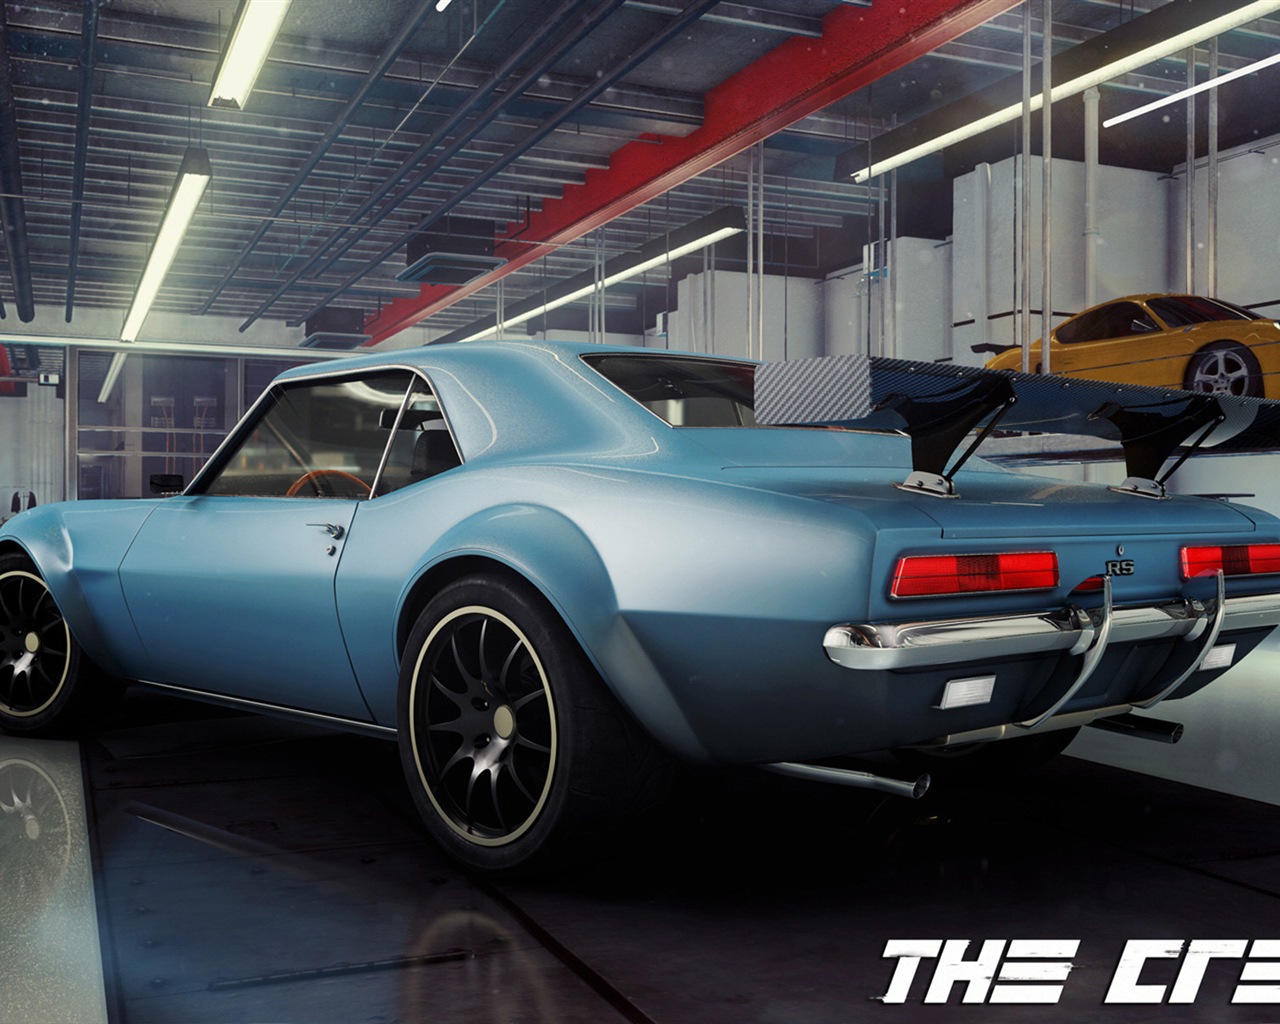 The Crew game HD wallpapers #12 - 1280x1024